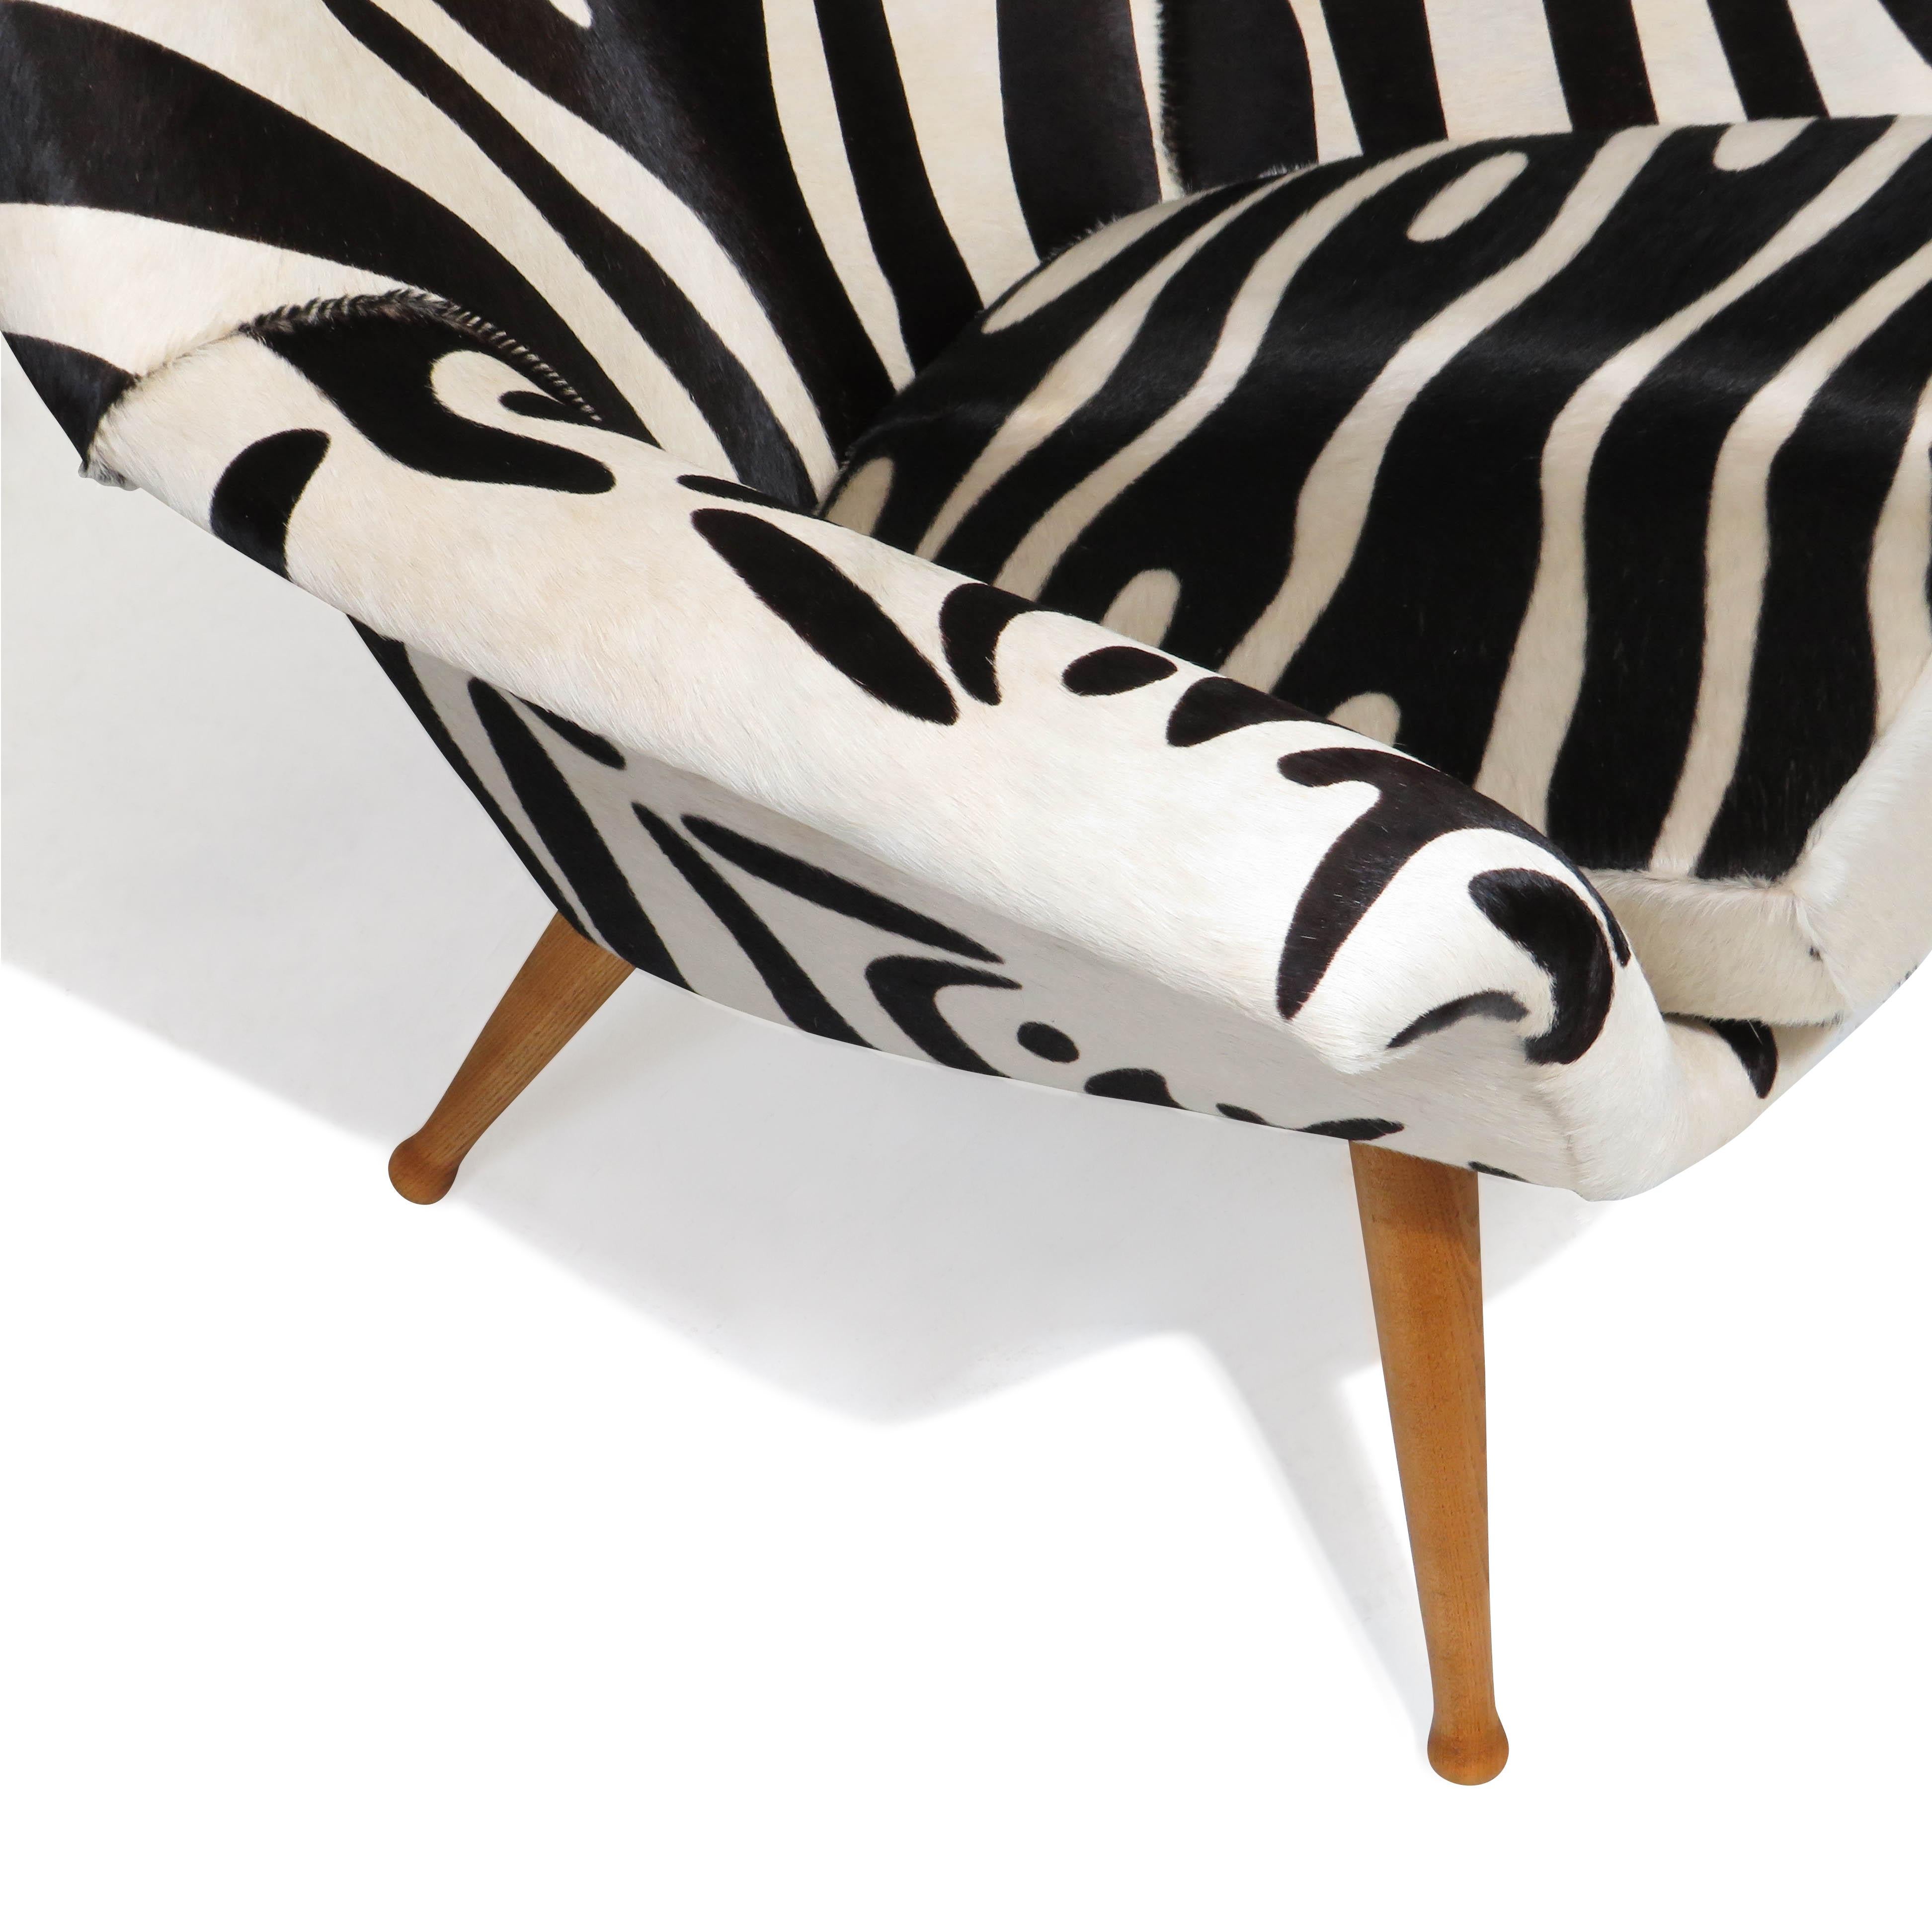 Torbjorn Afdal Danish Lounge Chair in Zebra Leather For Sale 1